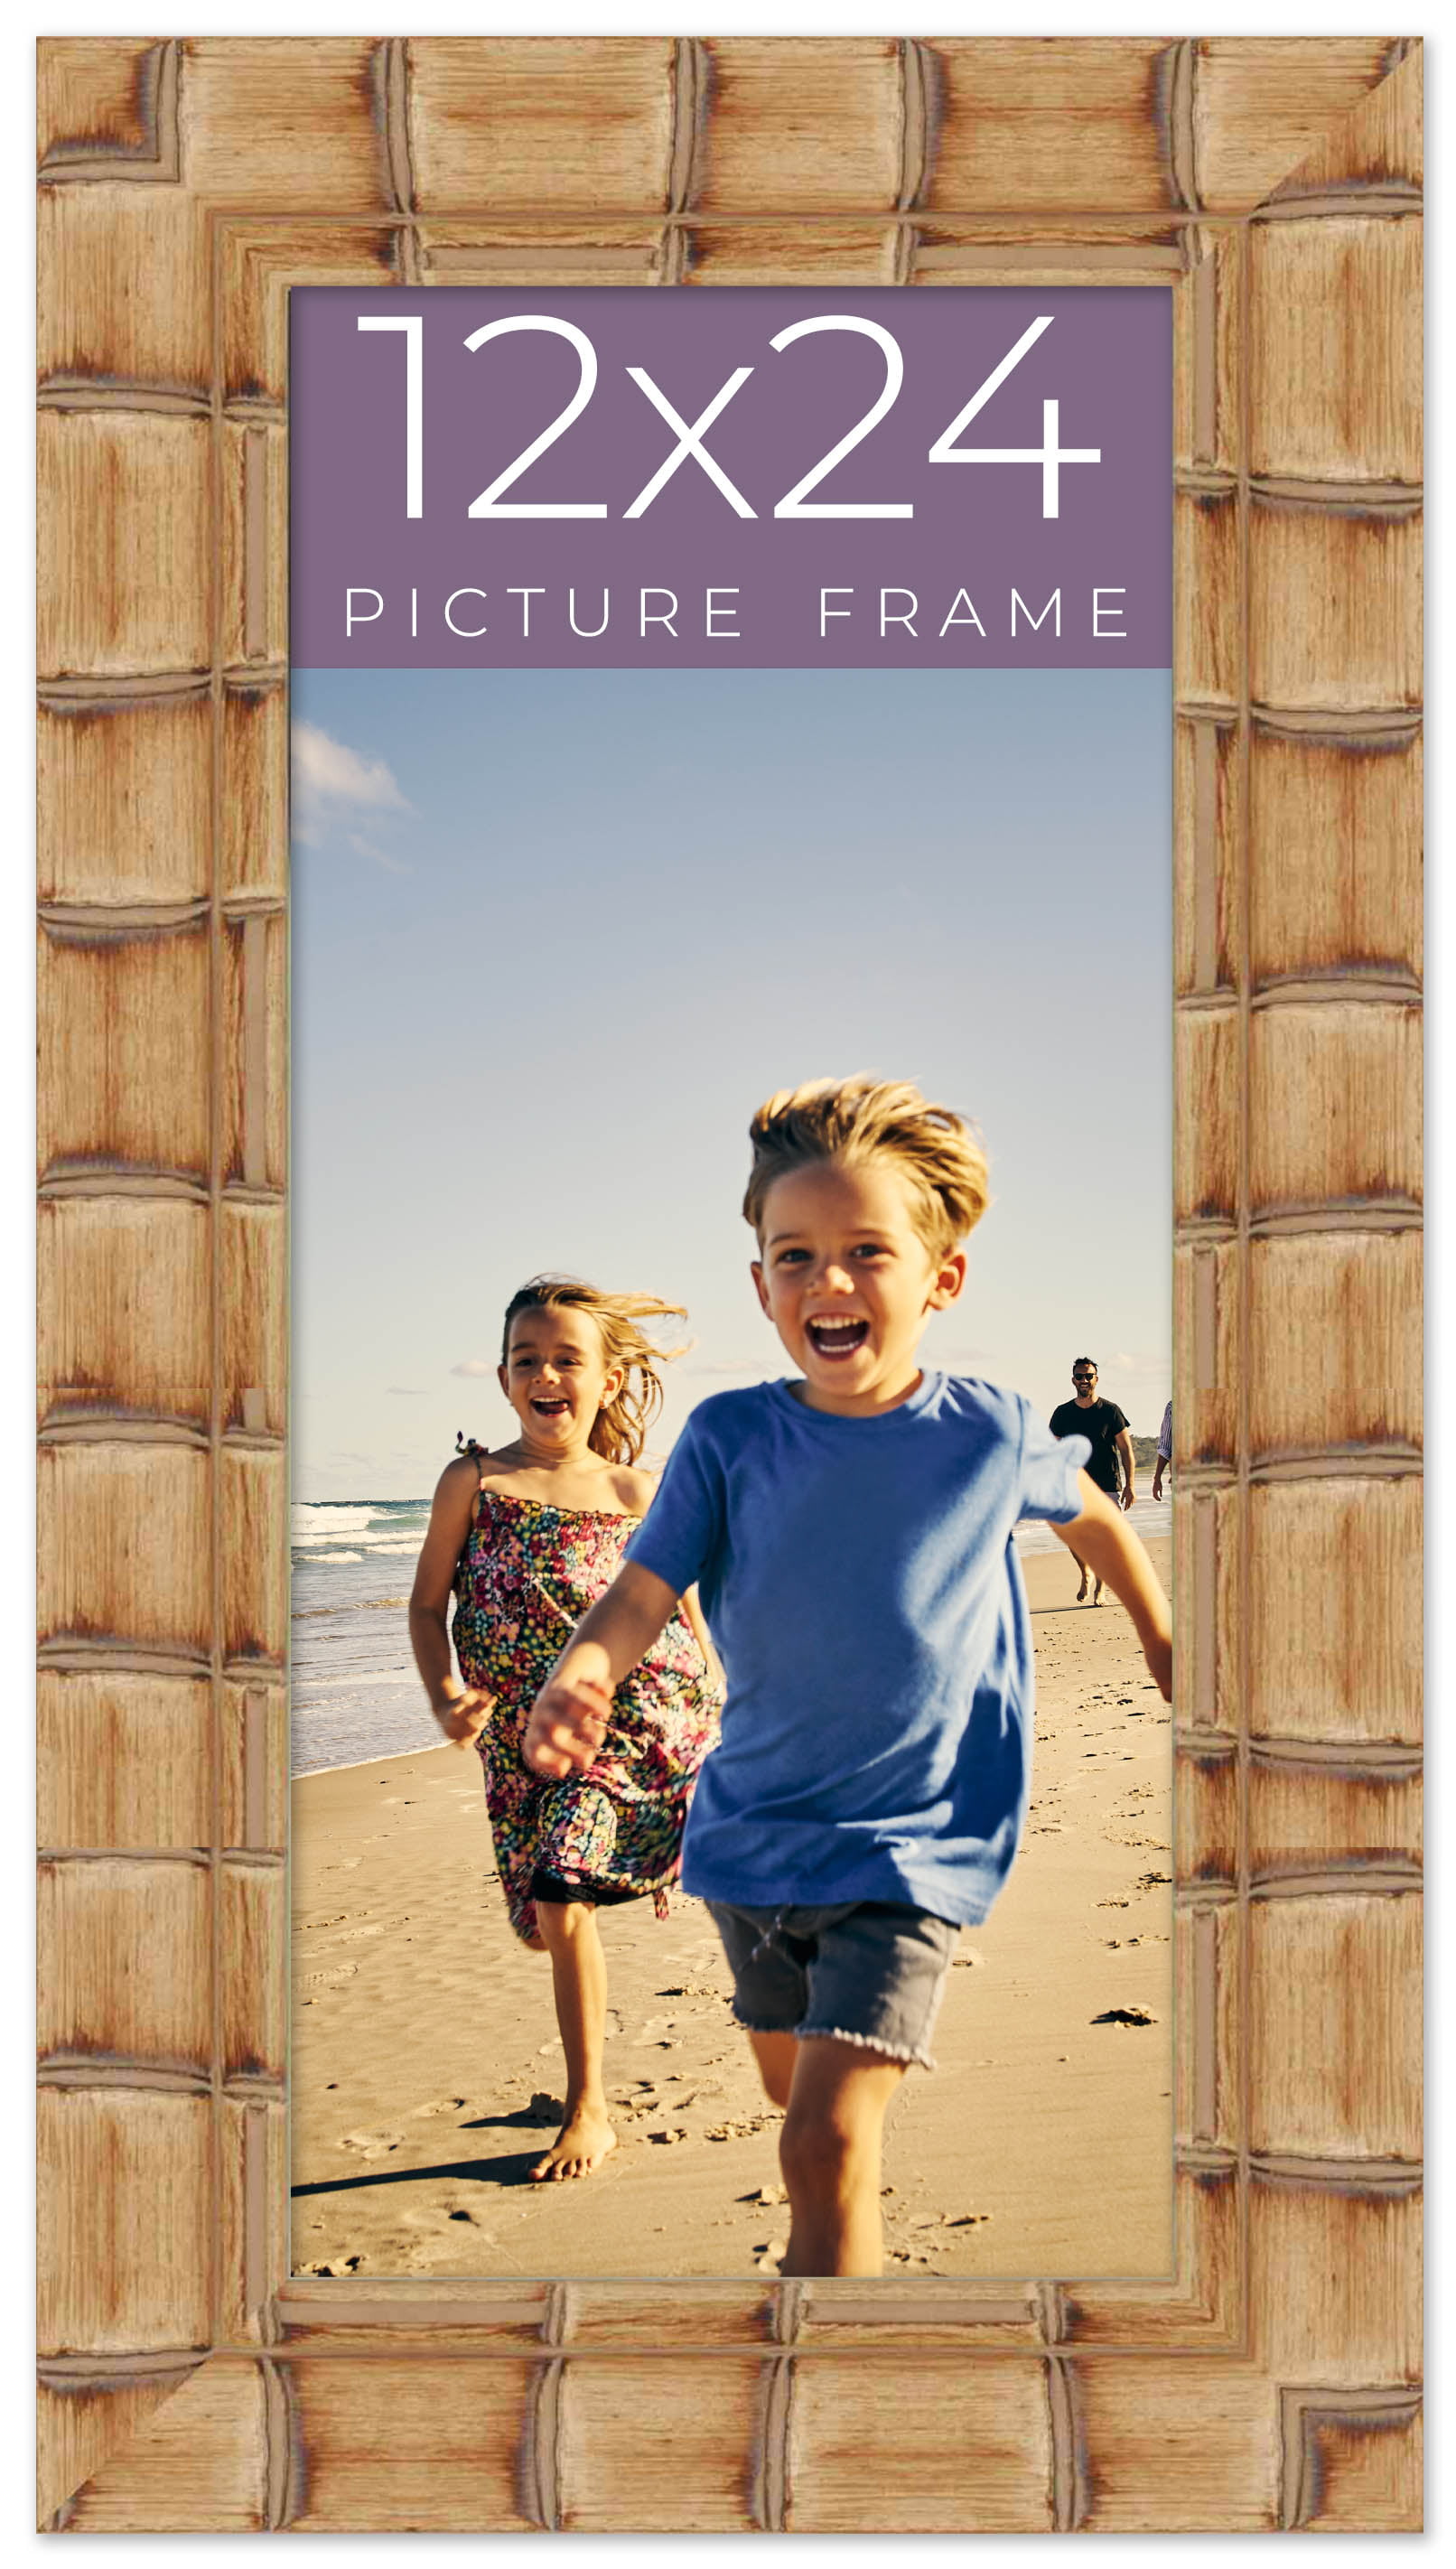 4x7 Farmhouse Brown Real Wood Picture Frame Width 1.5 inches, Interior  Frame De